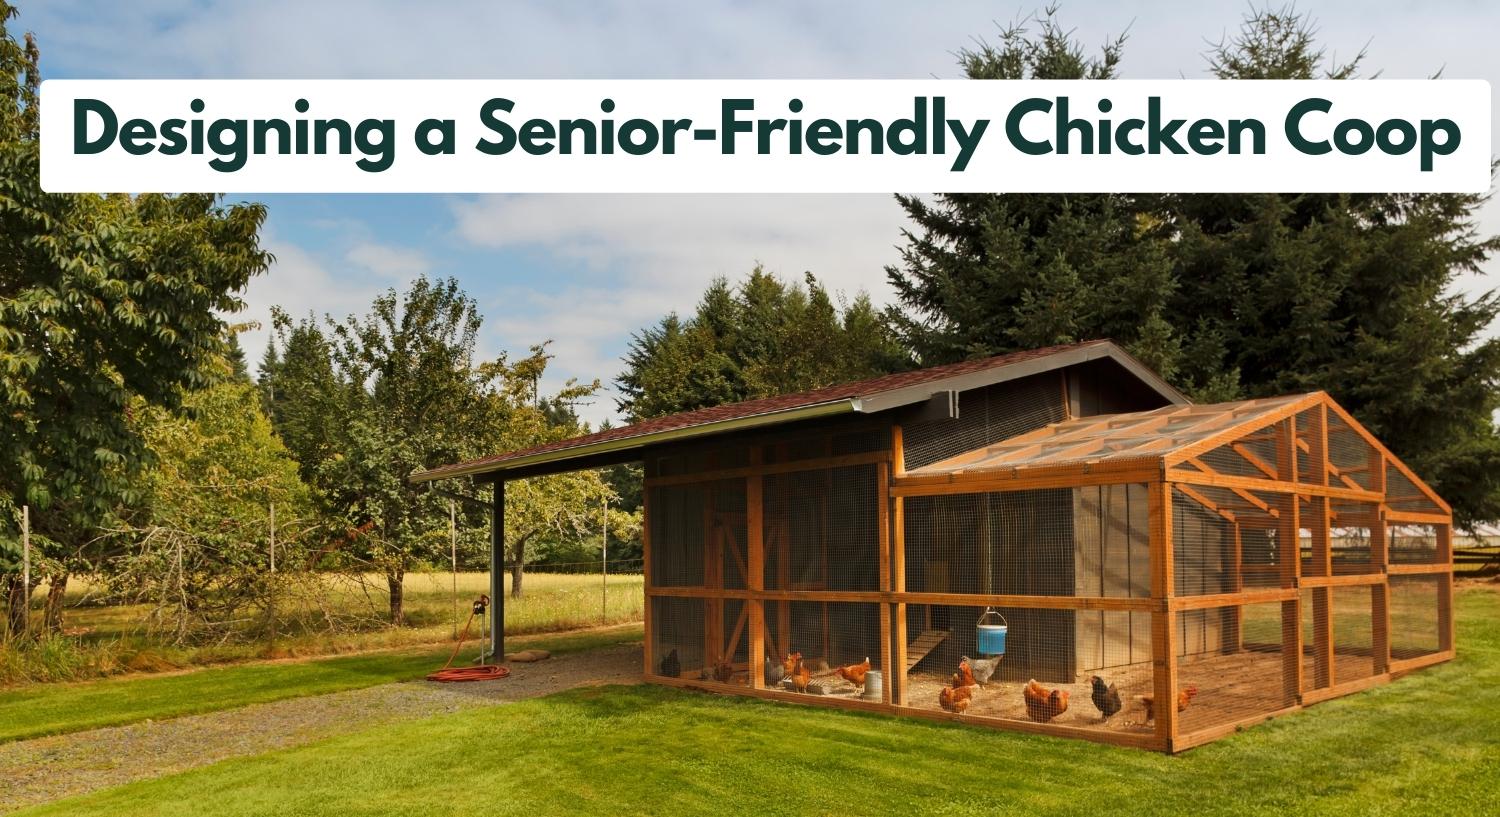 Premade Chicken Coops: Creative DIY Projects for Senior Chicken Enthusiasts